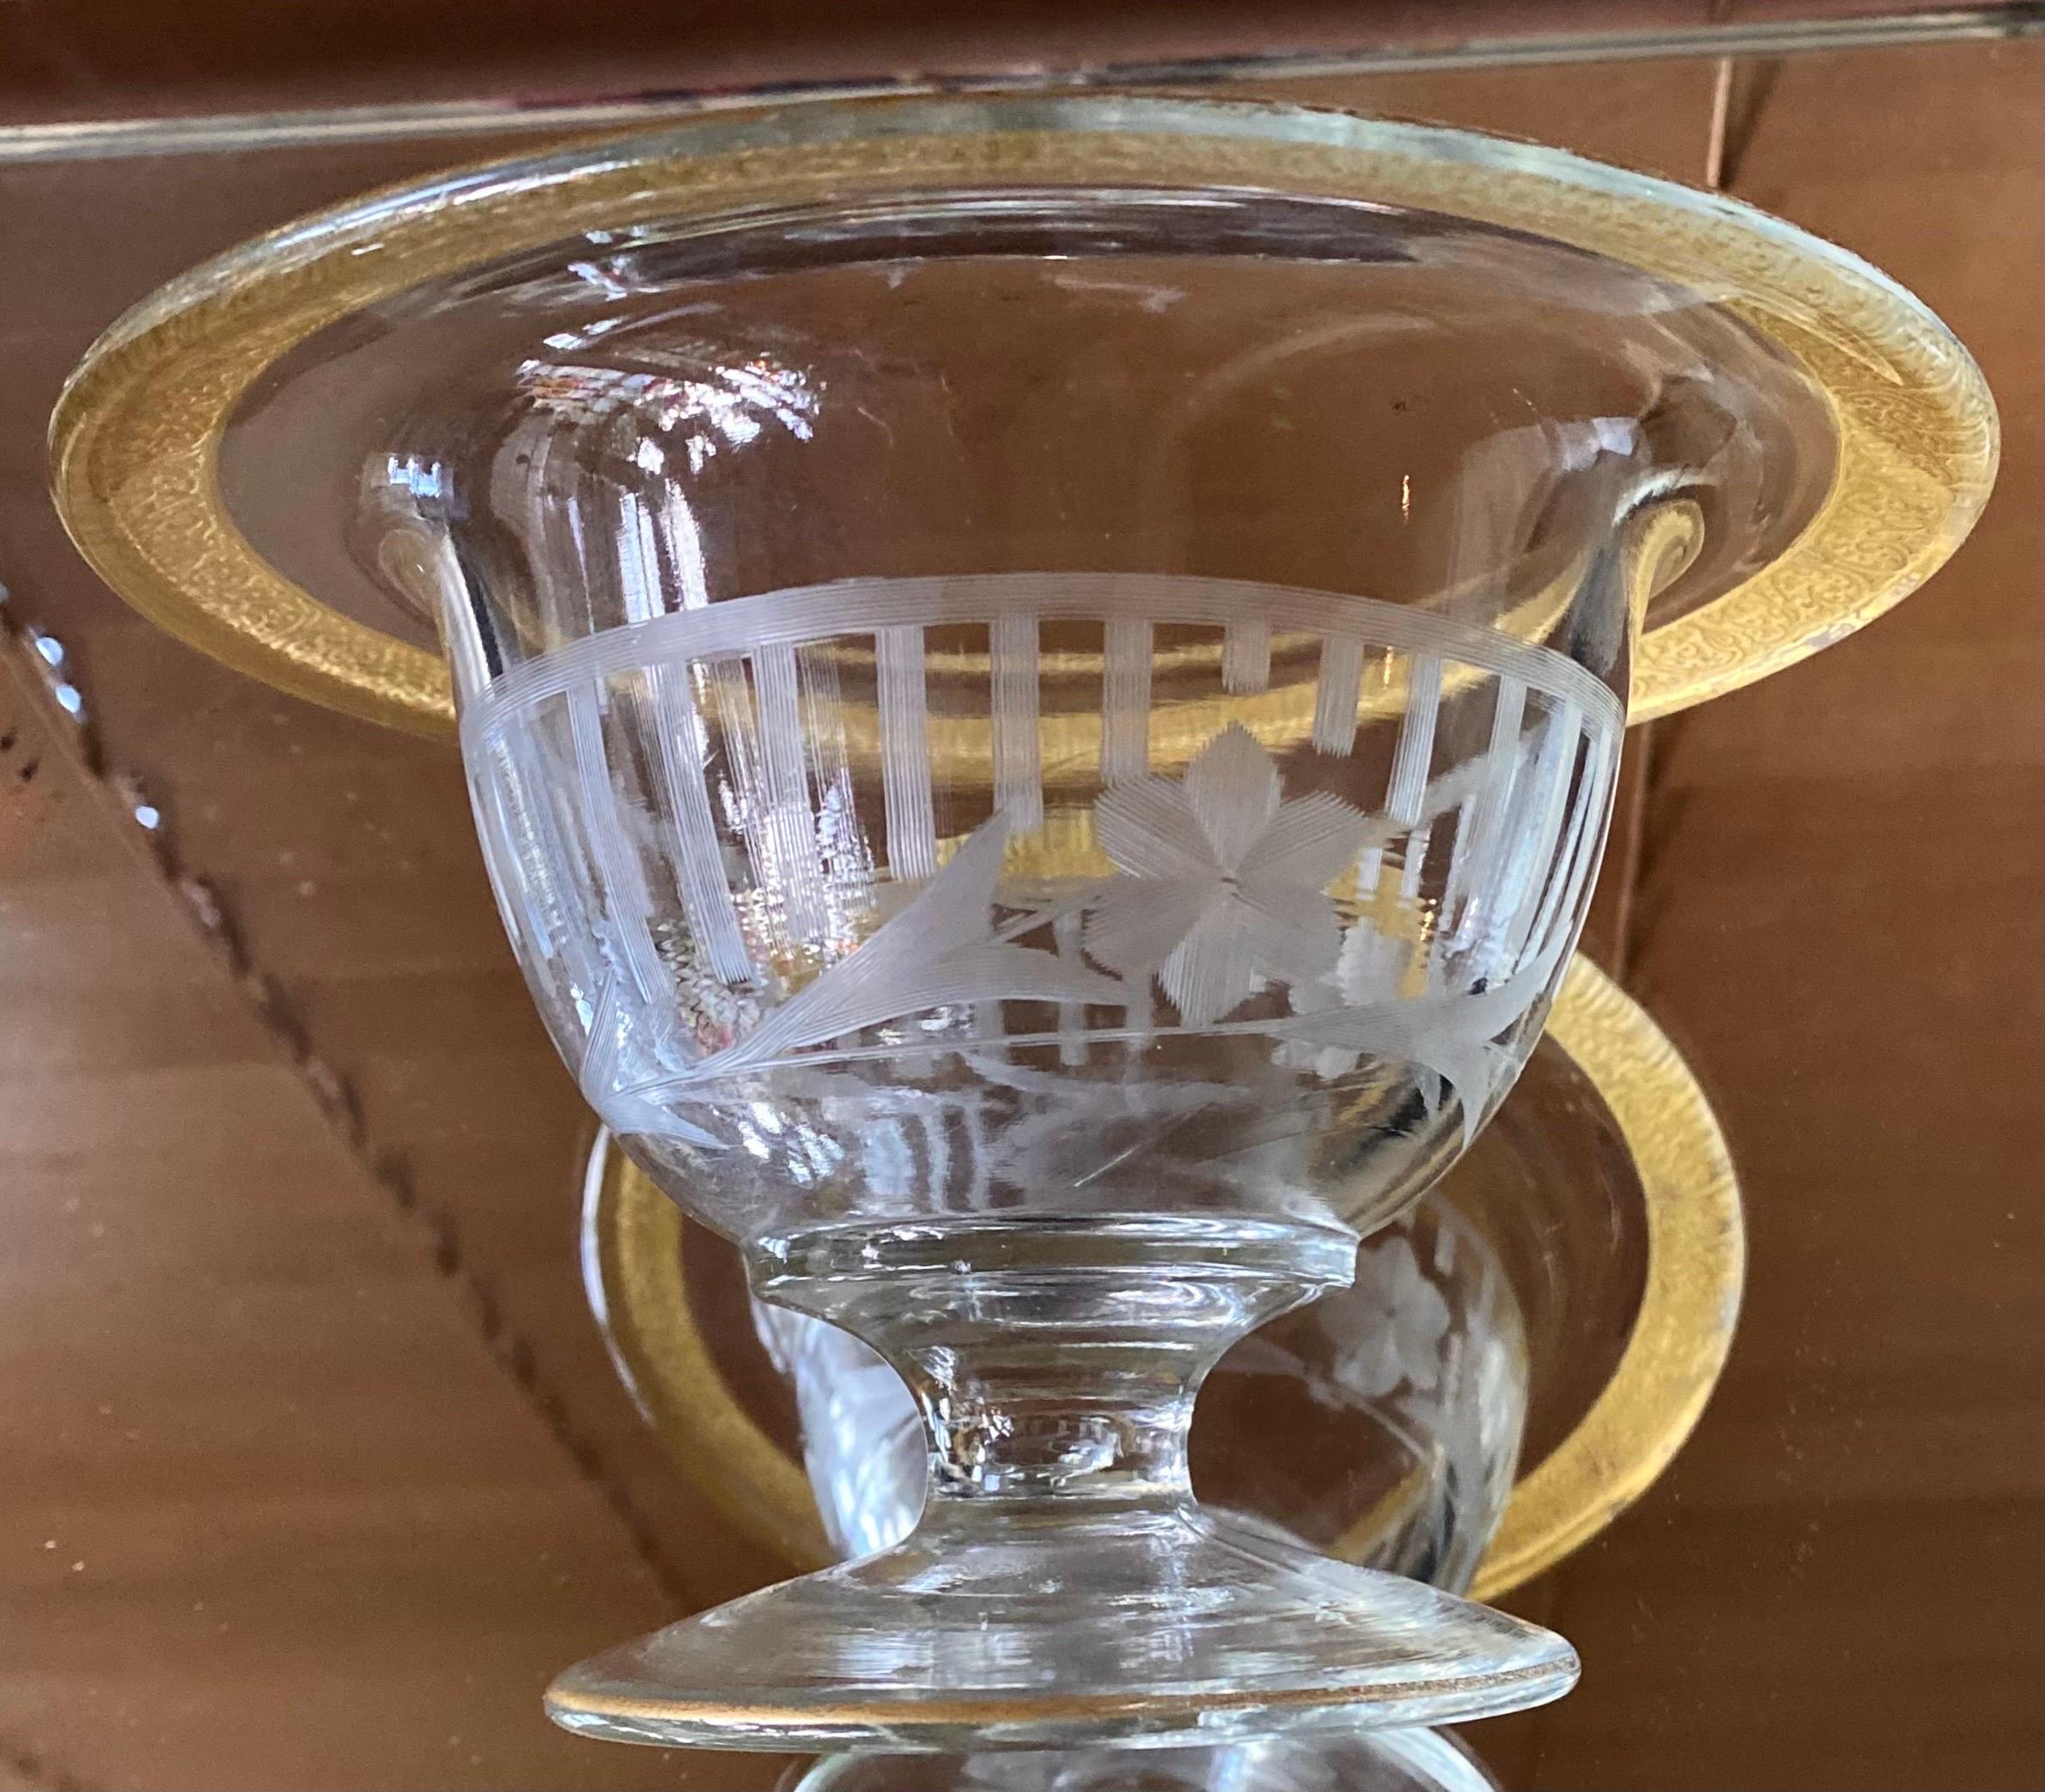 American Antique Cut Glass Footed Compote Dish With Chased Gold Florentine Trim. For Sale